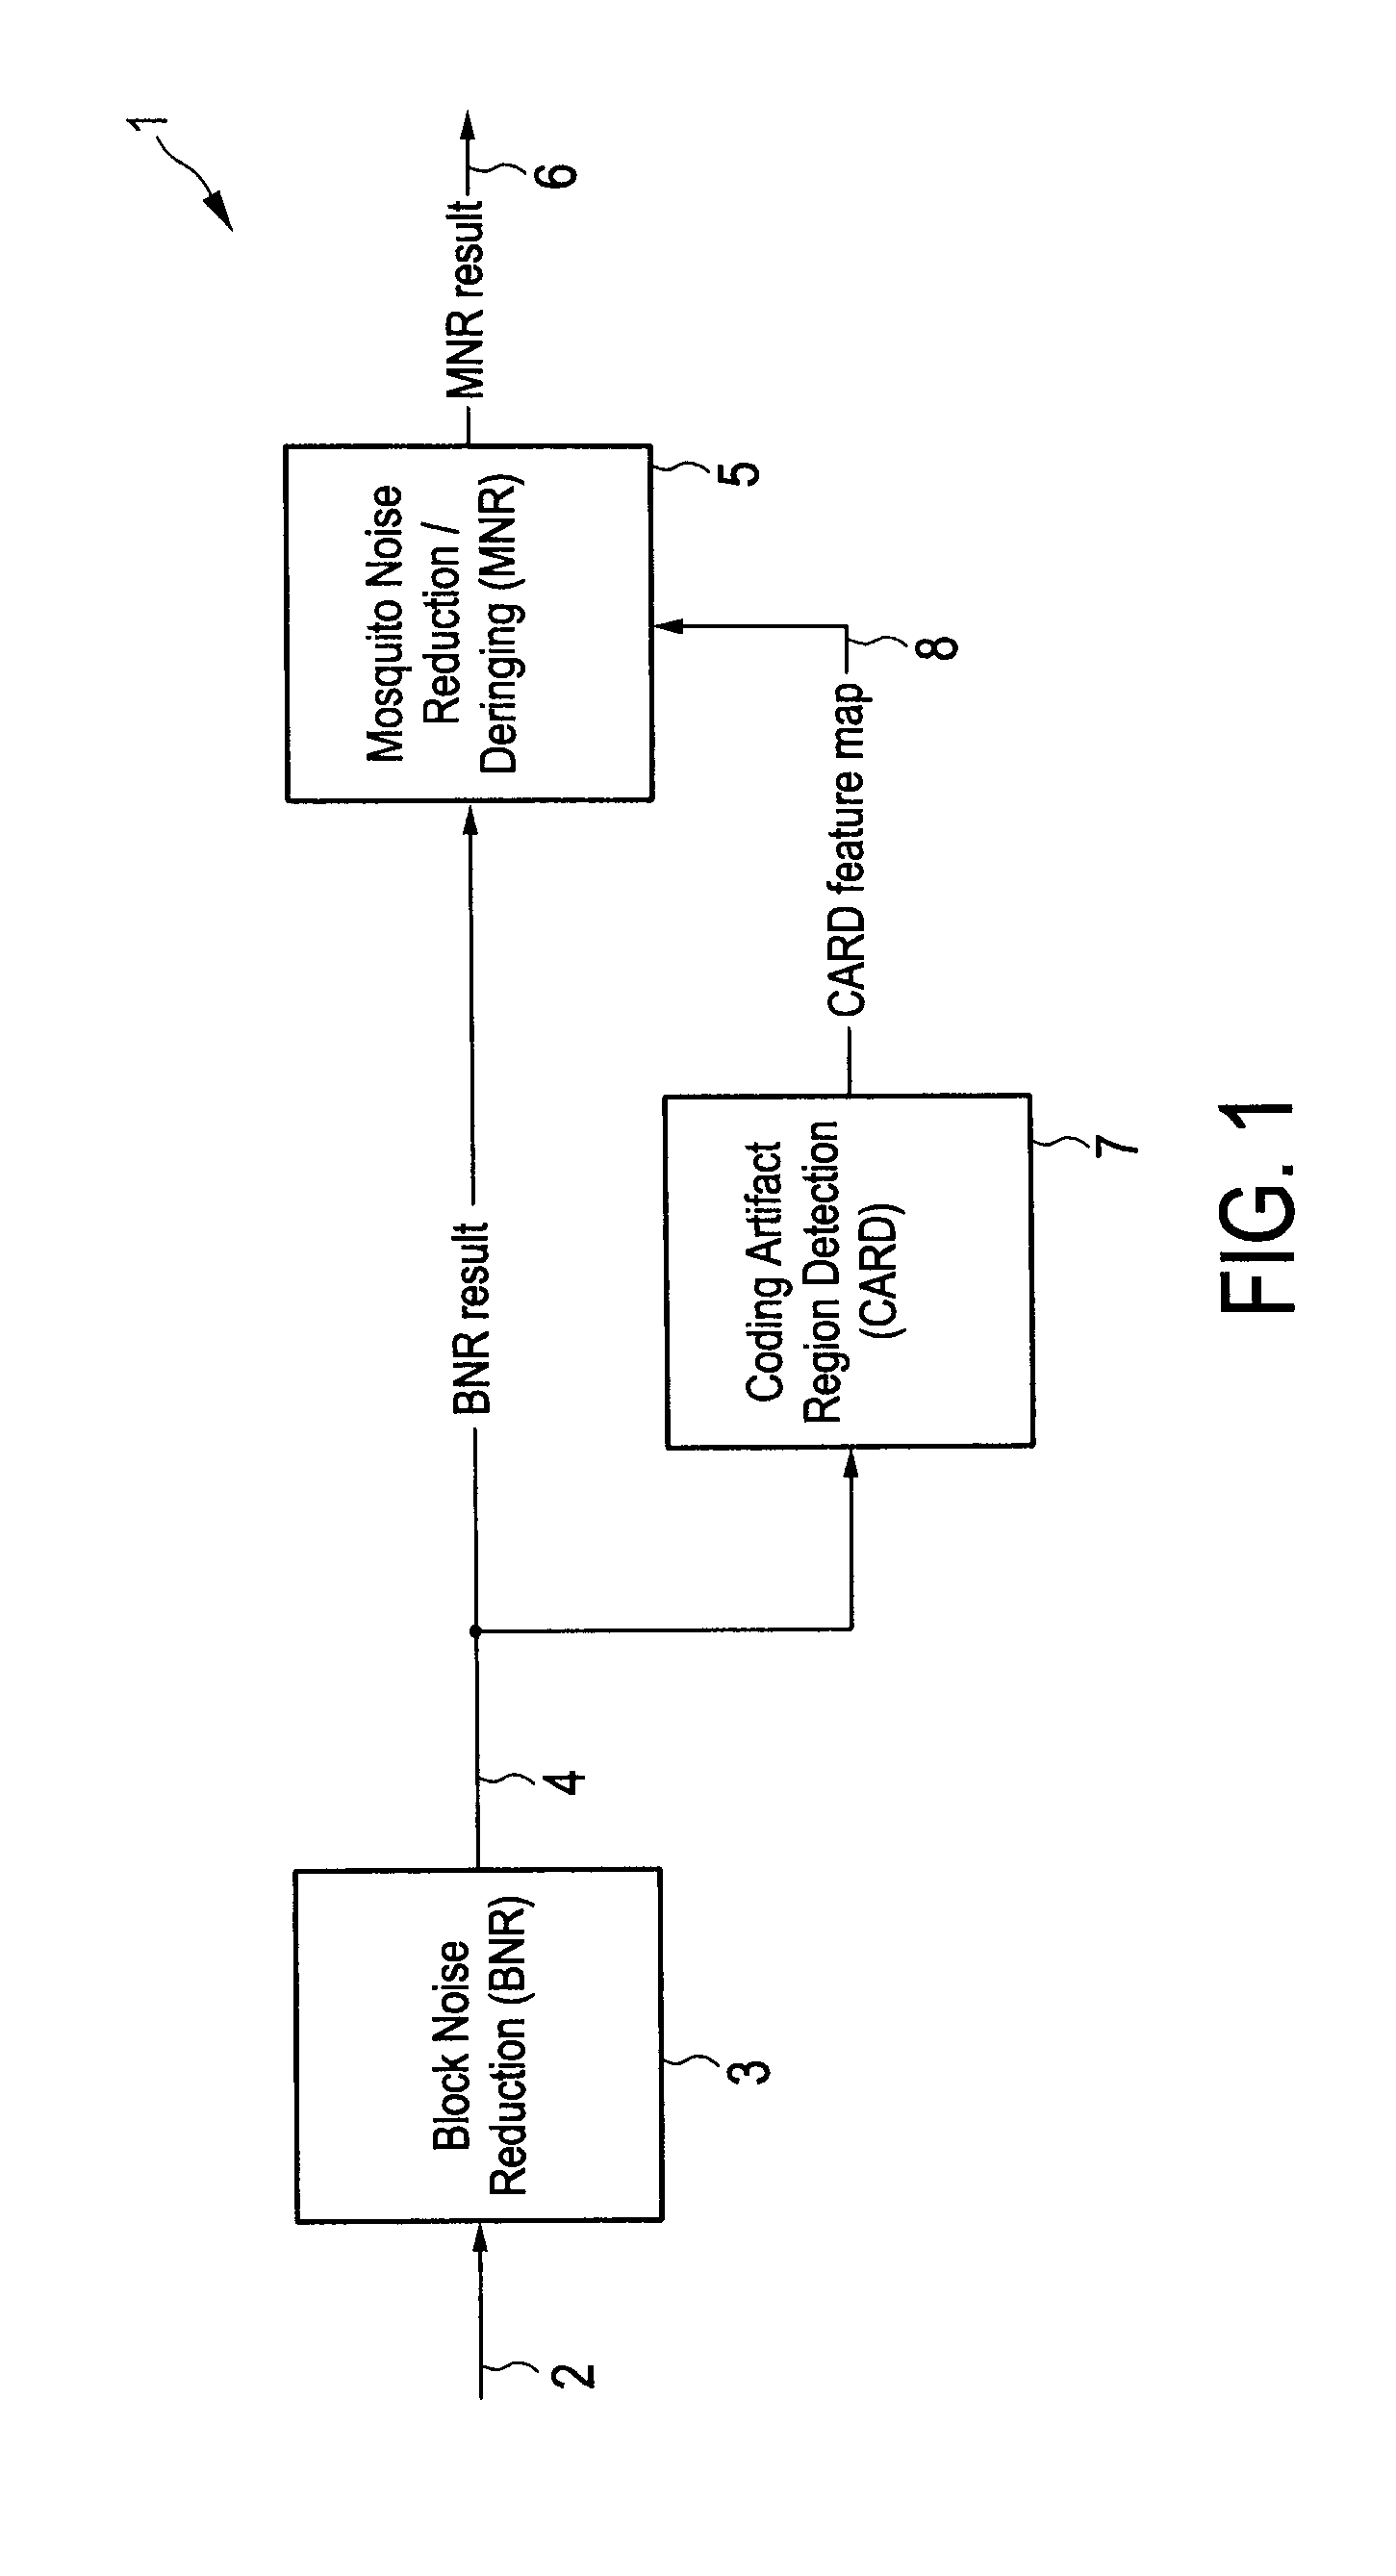 Method and apparatus for detecting coding artifacts in an image